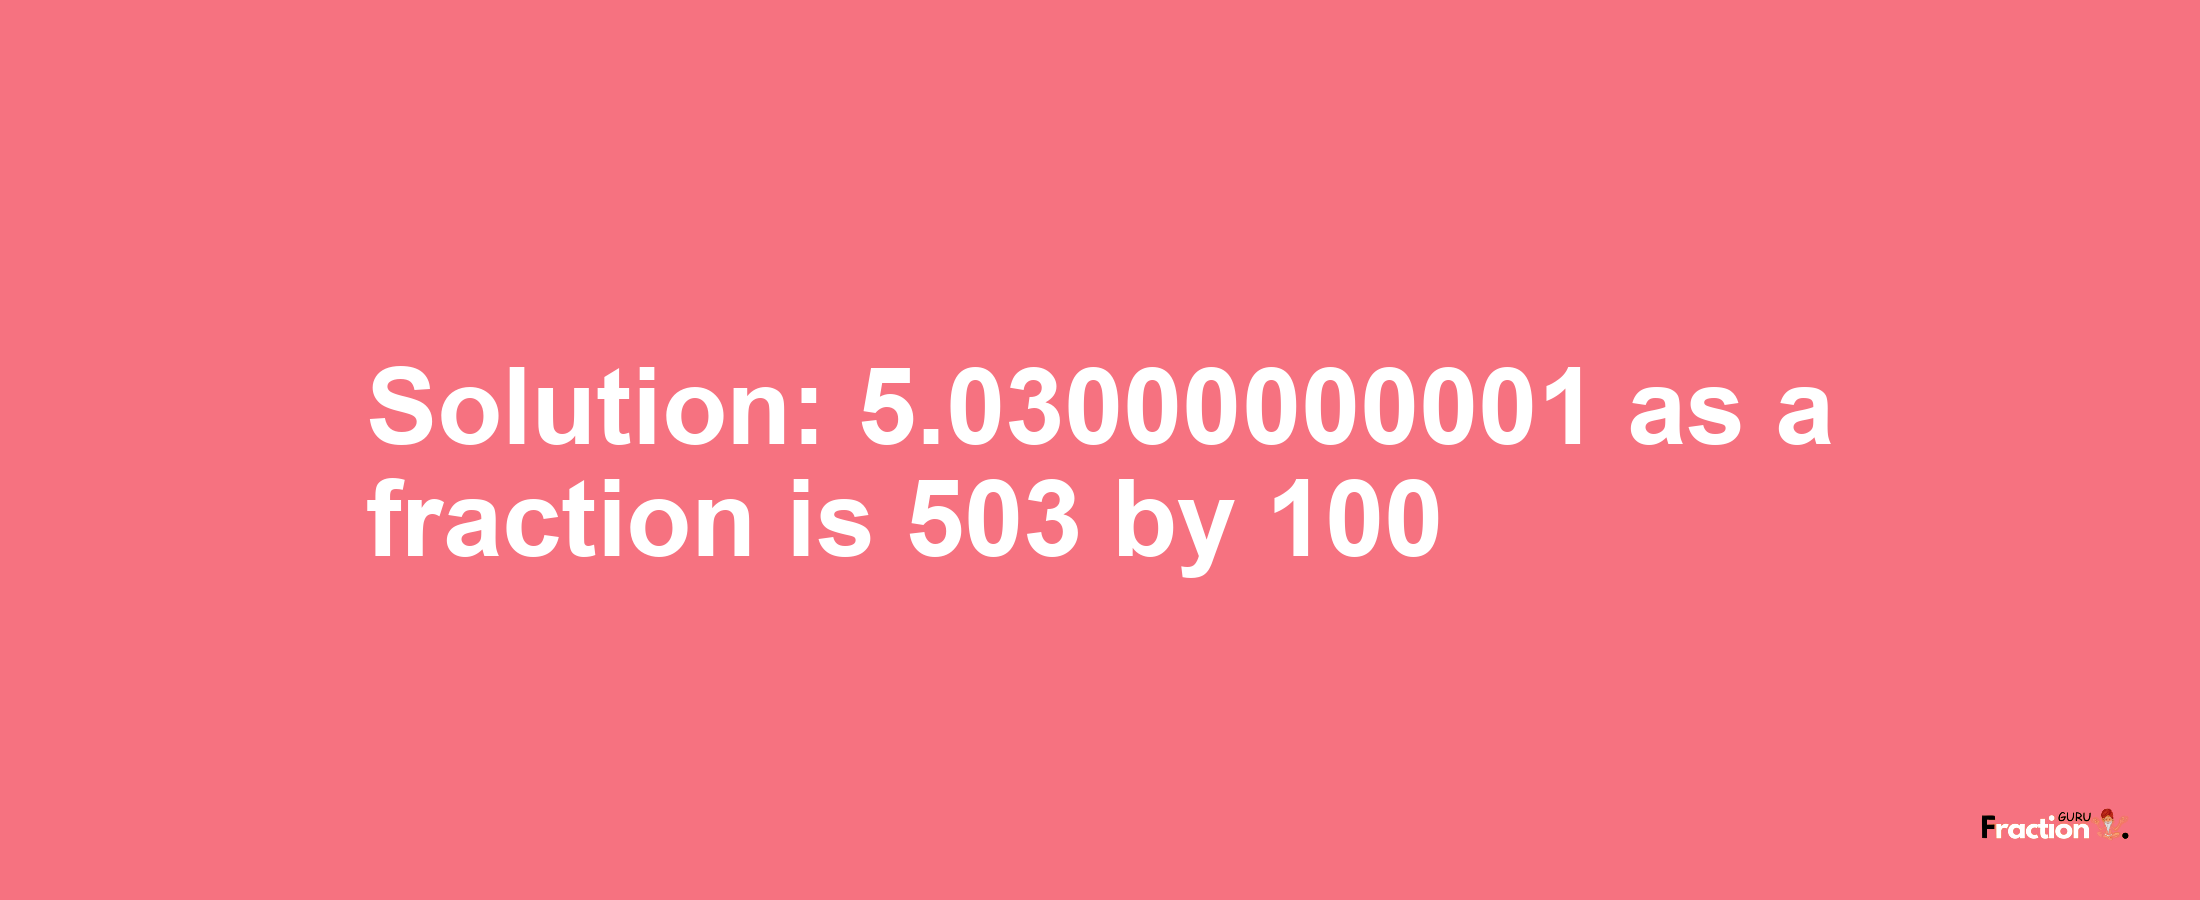 Solution:5.03000000001 as a fraction is 503/100